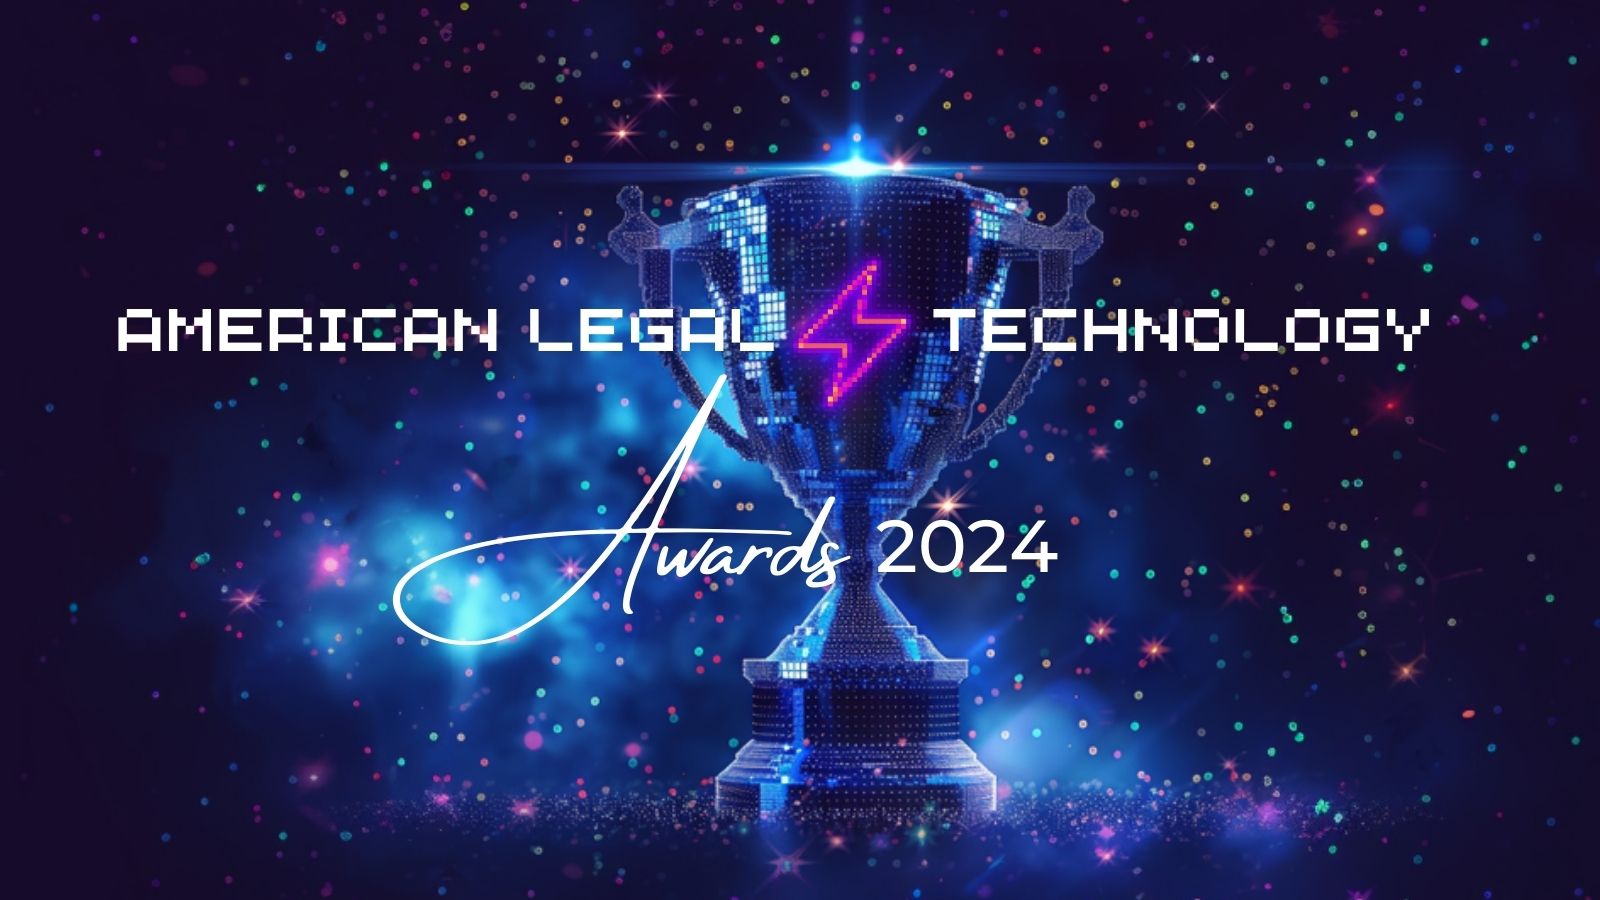 Nominations Now Being Accepted for the 2024 American Legal Technology Awards, Set to be Announced at Gala Dinner in October